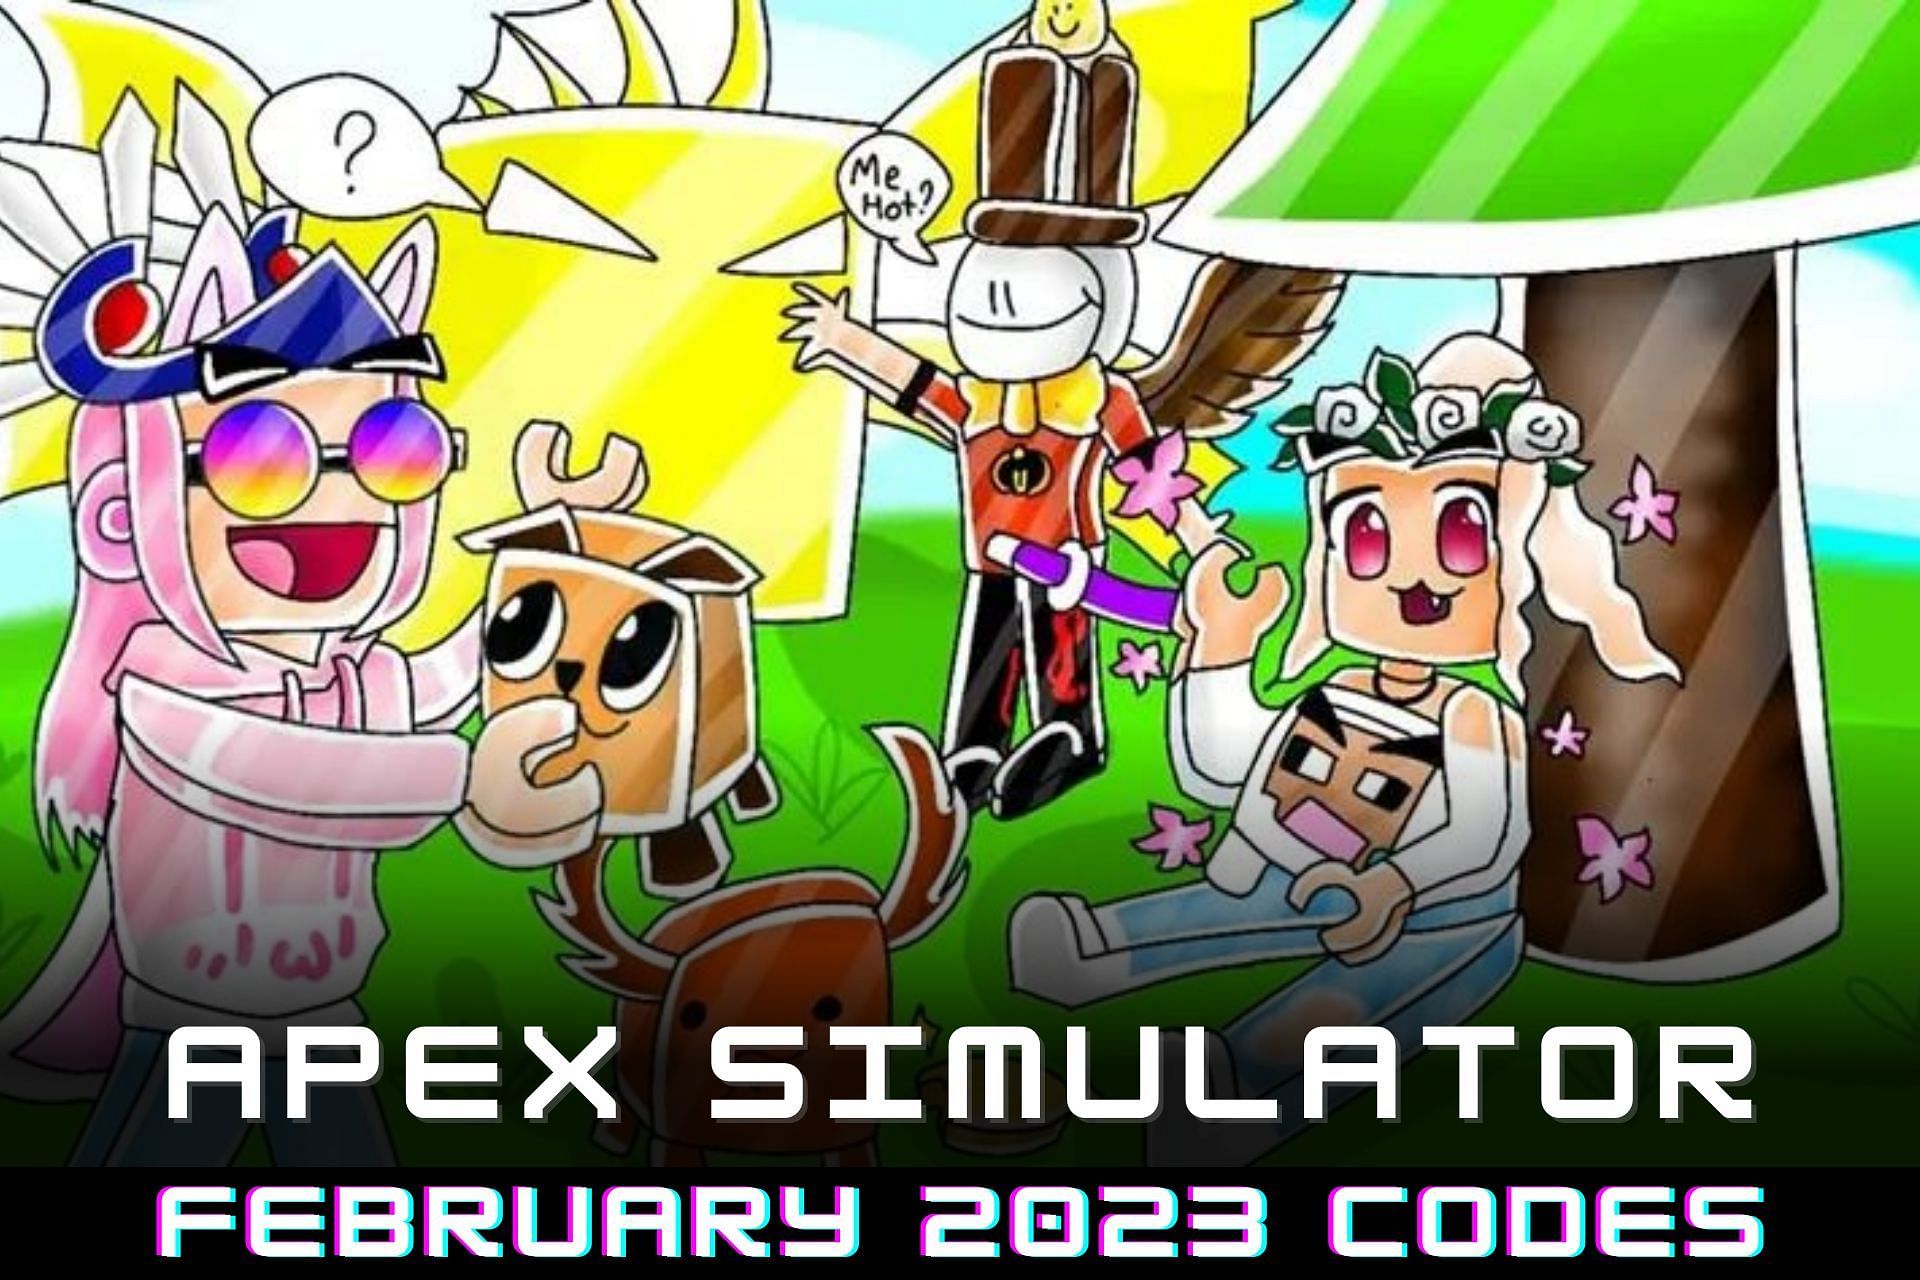 Roblox Anime Catching Simulator Codes (April 2023)